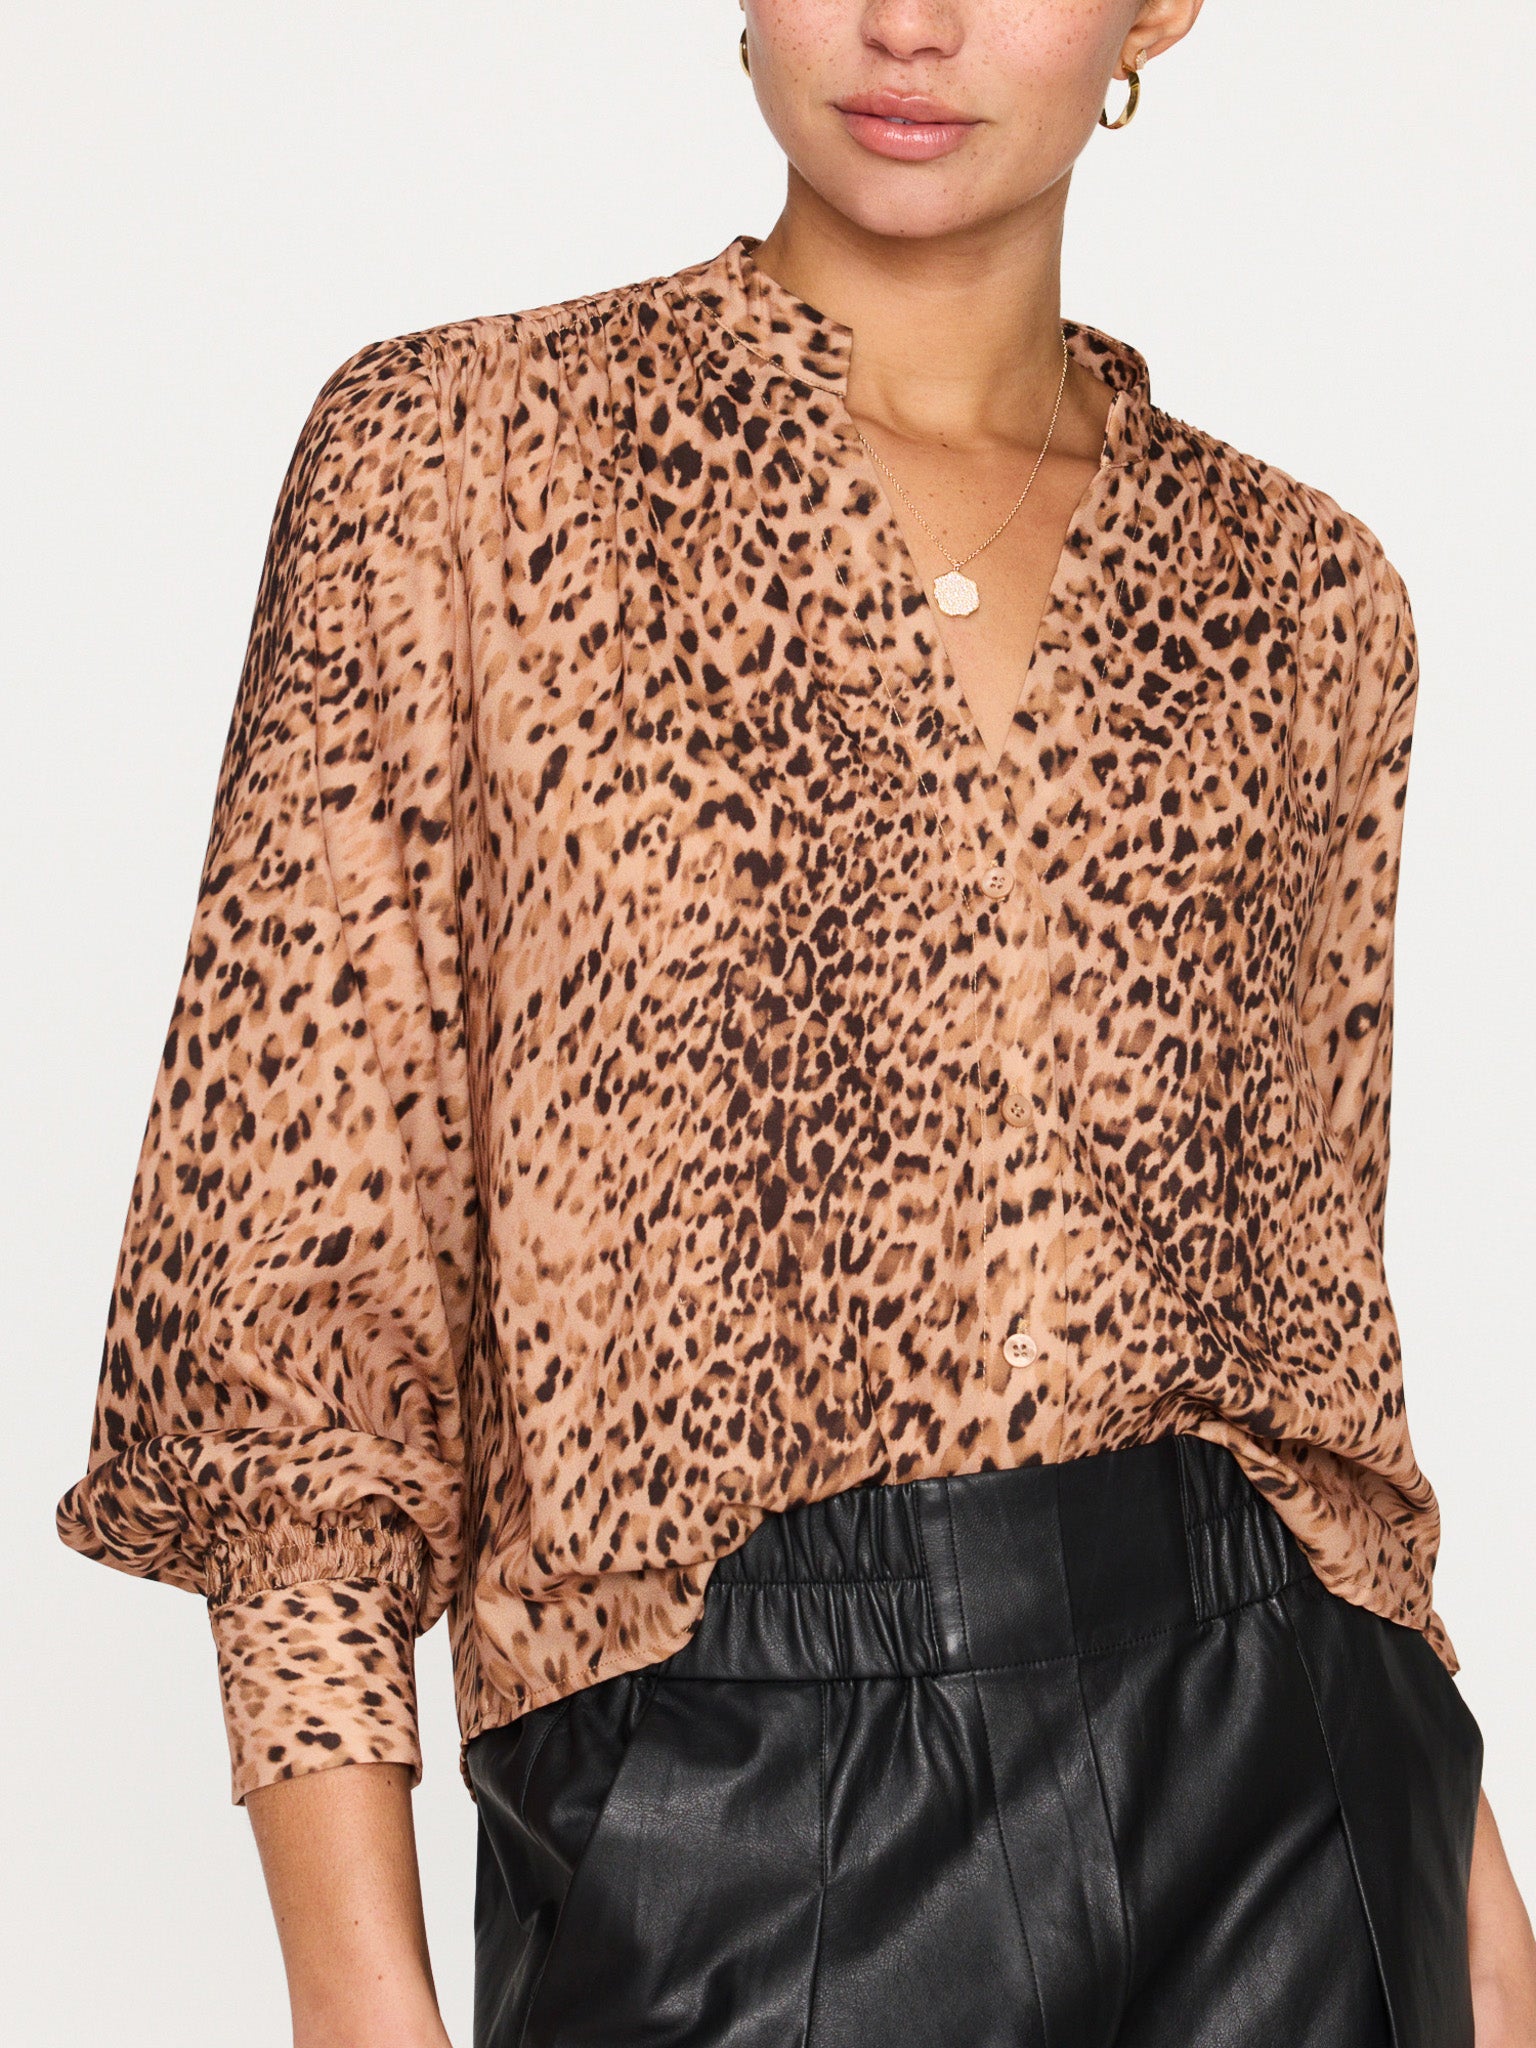 Ember blouse leopard print front view 4